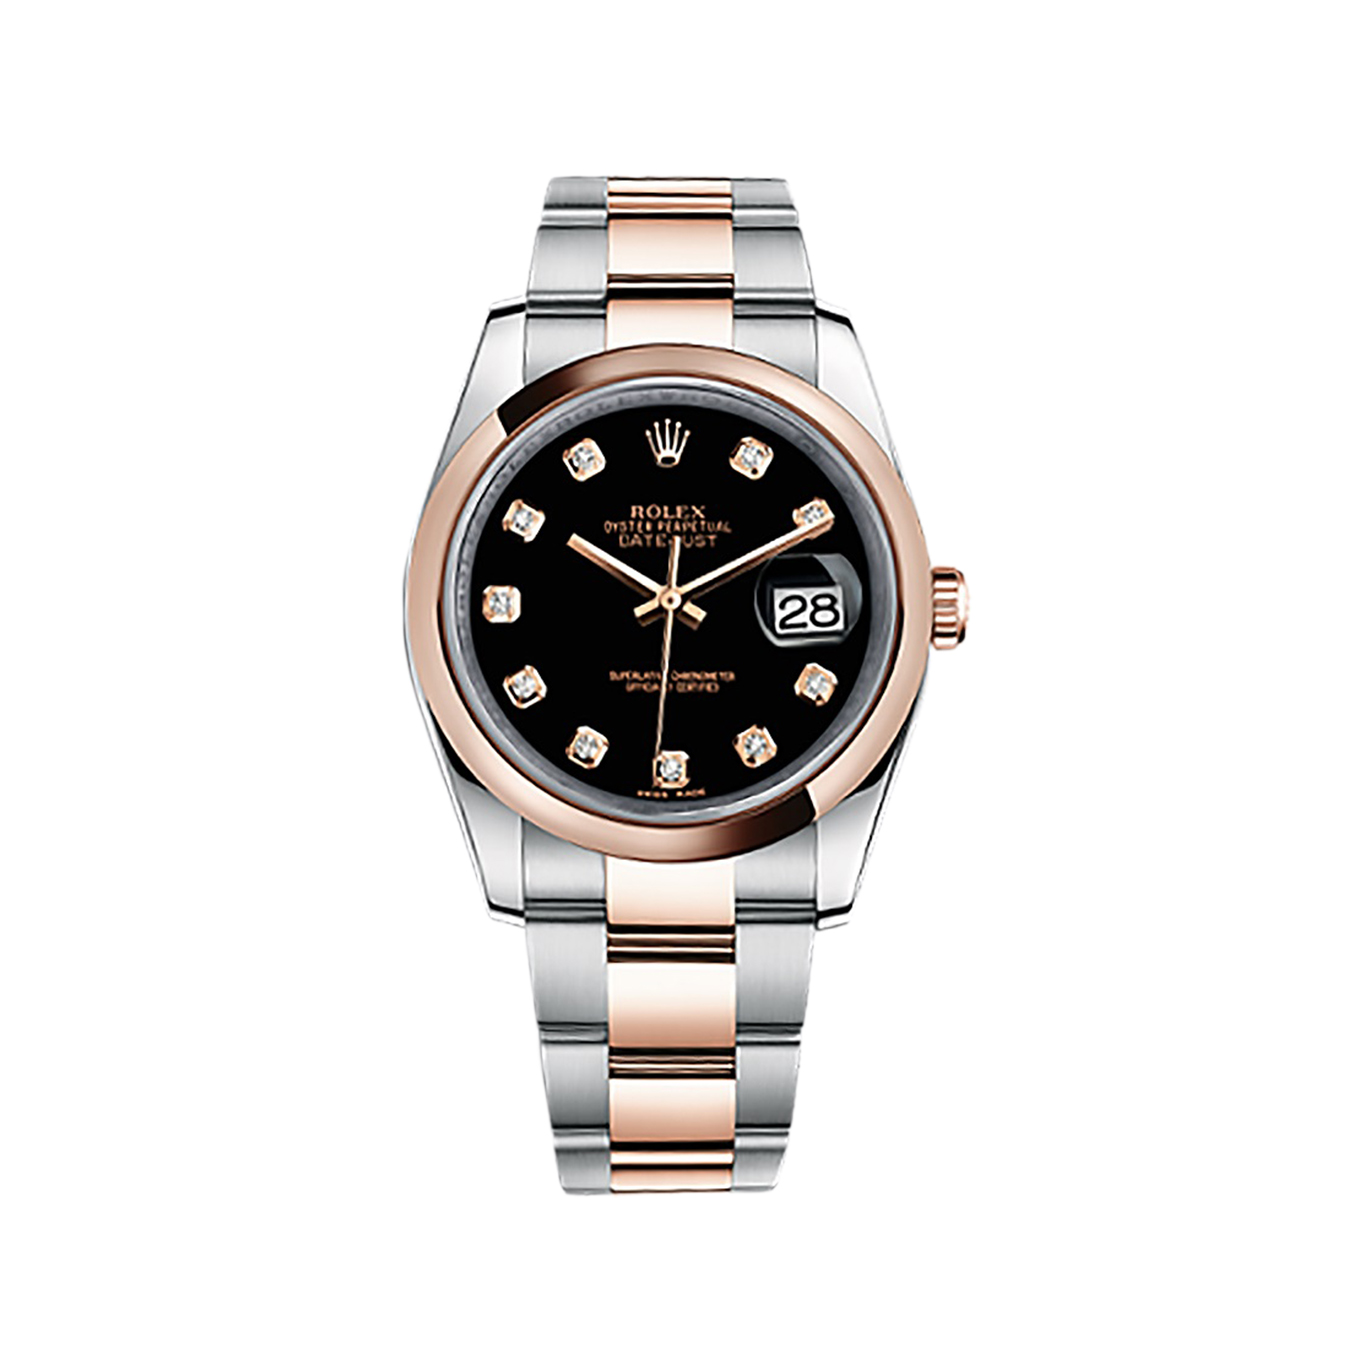 Datejust 36 116201 Rose Gold & Stainless Steel Watch (Black Set with Diamonds) - Click Image to Close